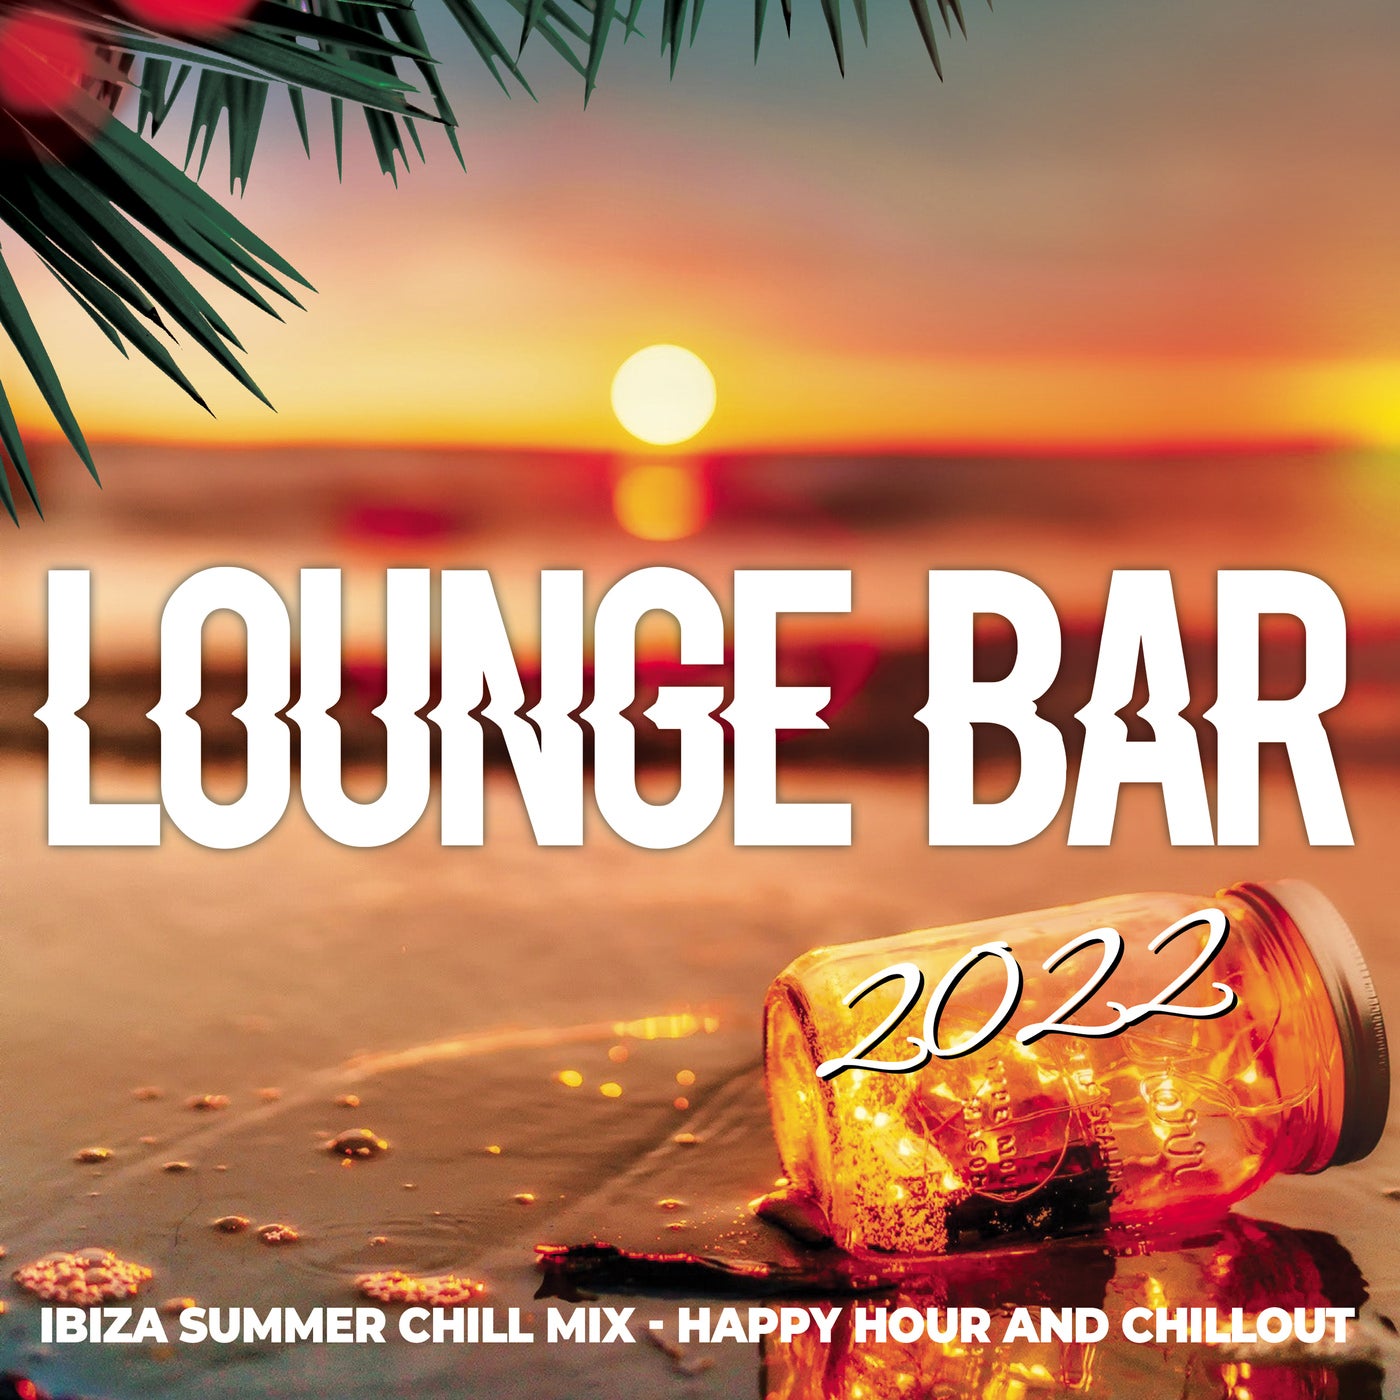 Lounge Bar 2022 - Ibiza Chill Mix - Happy Hour and Chillout from Best Sound Beatport